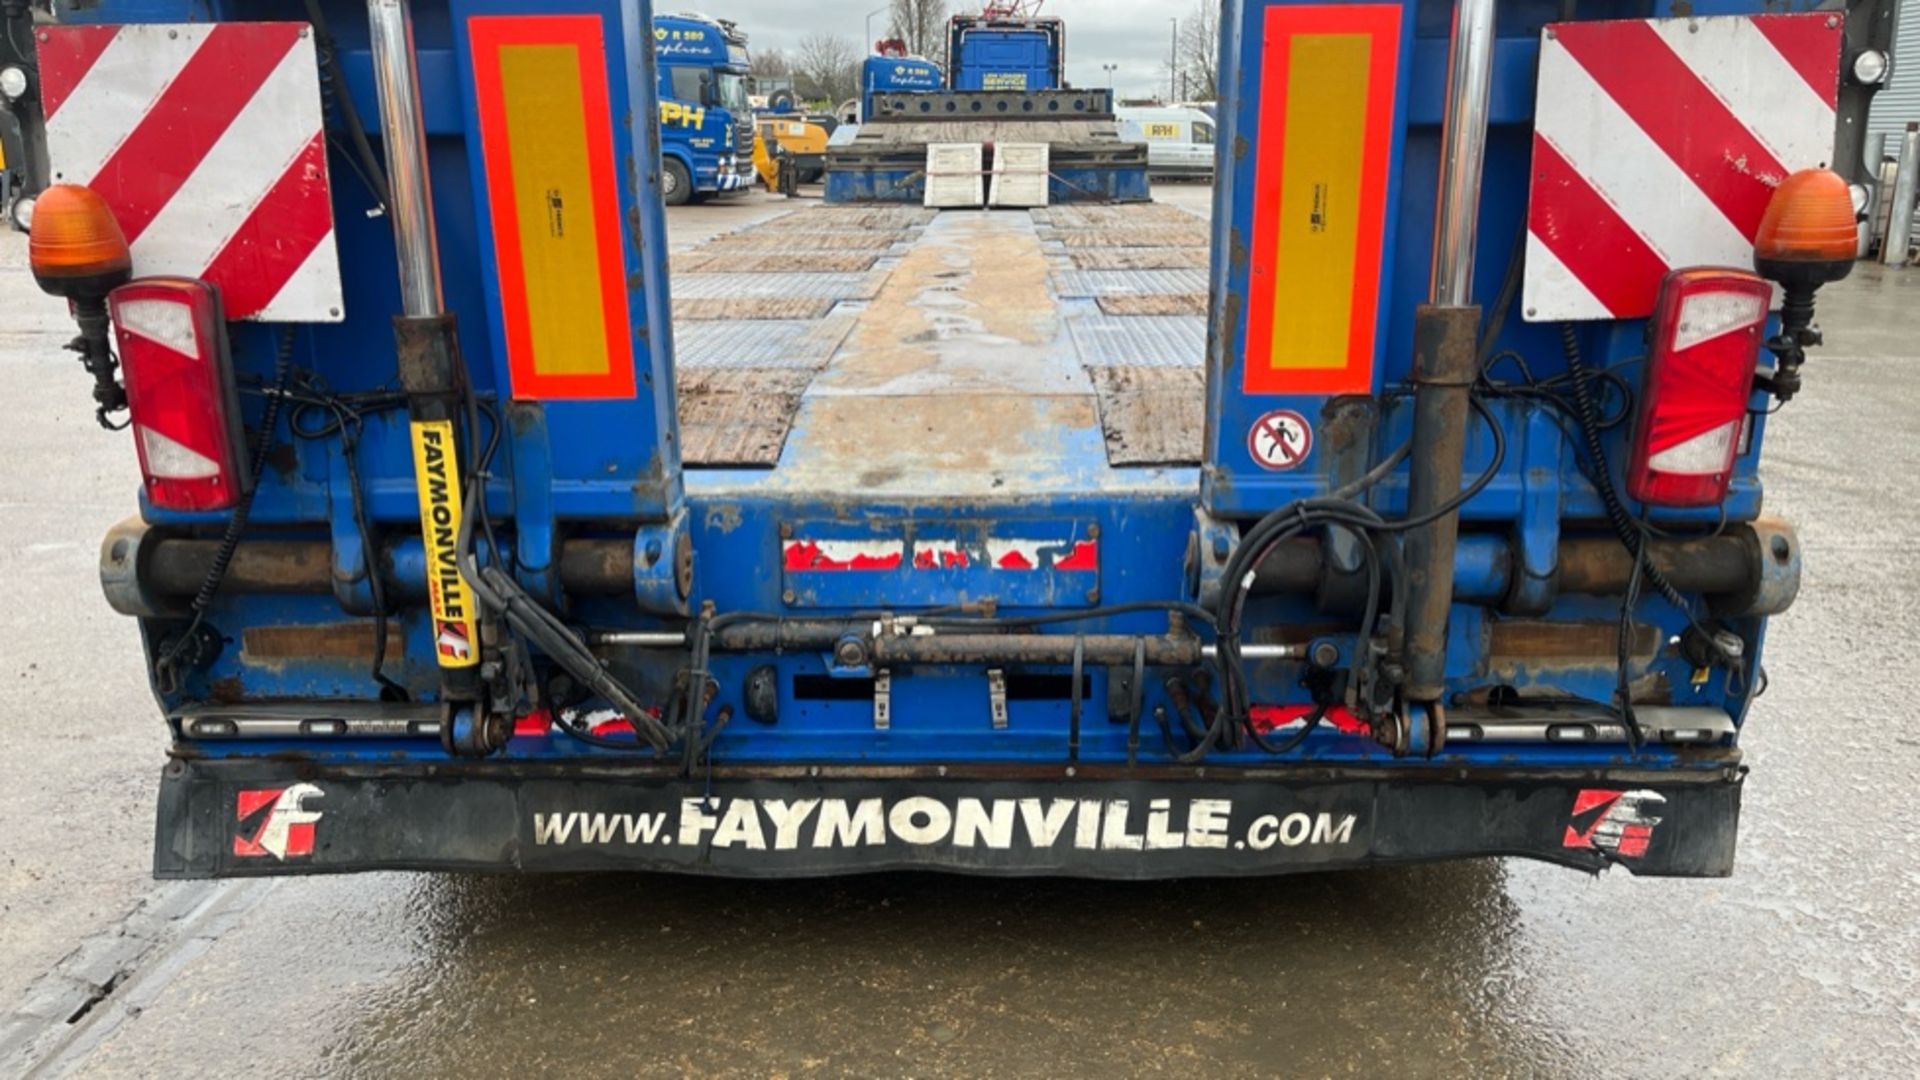 FAYMONVILLE MULTIMAX - EXTENDABLE SEMI LOW LOADER Trailer (Year 2018) - Image 13 of 32